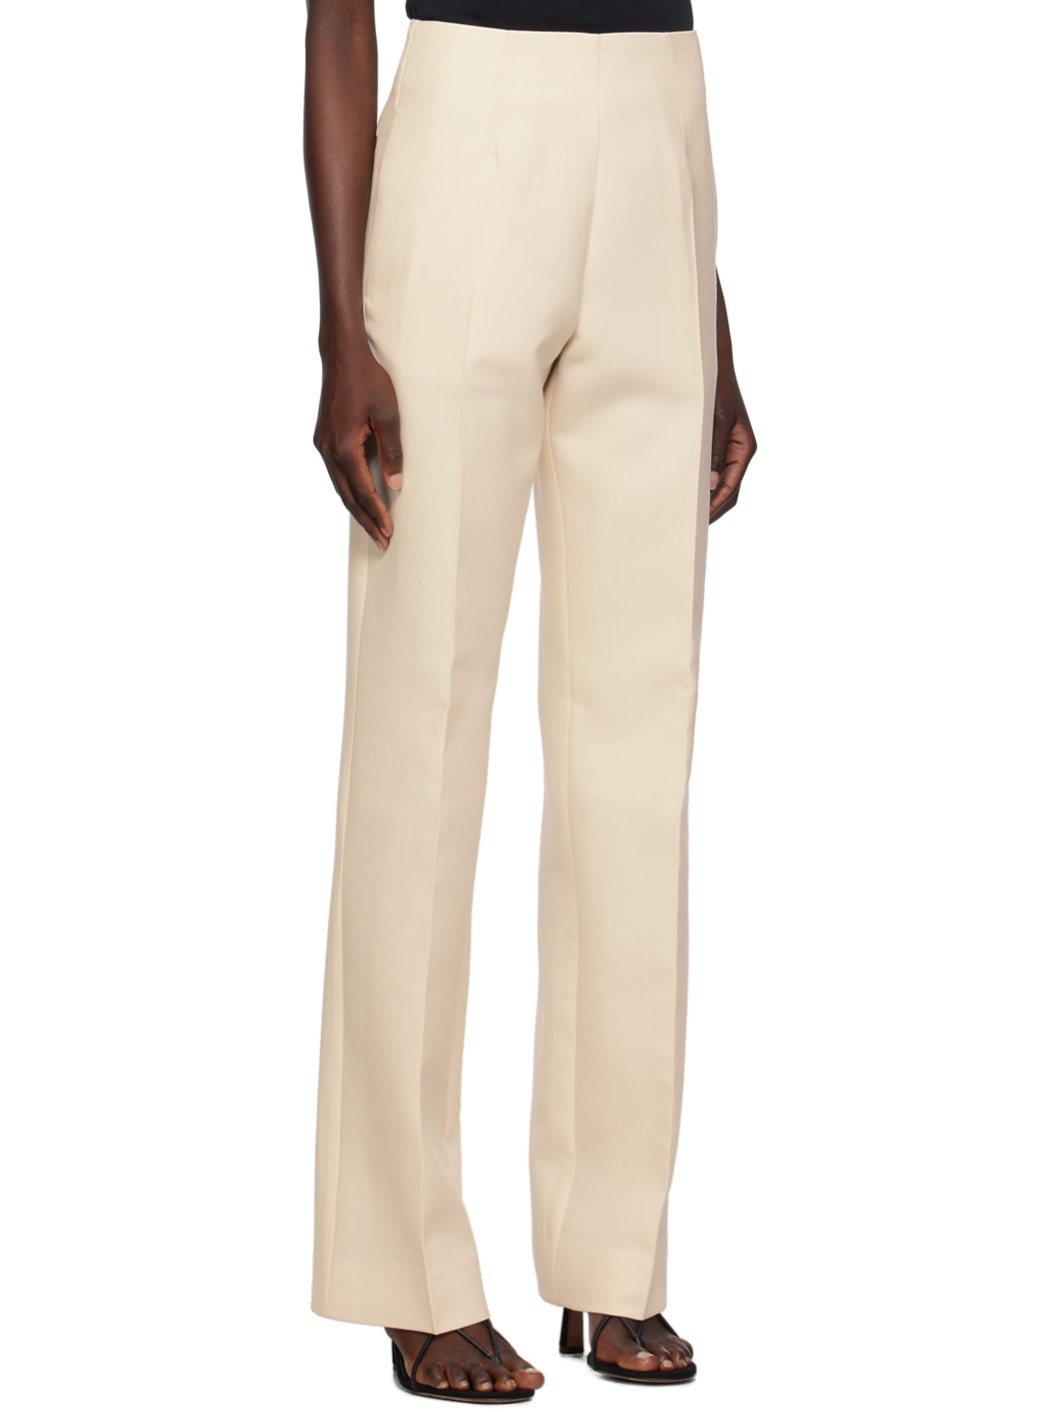 Off-White Romy Trousers - 2